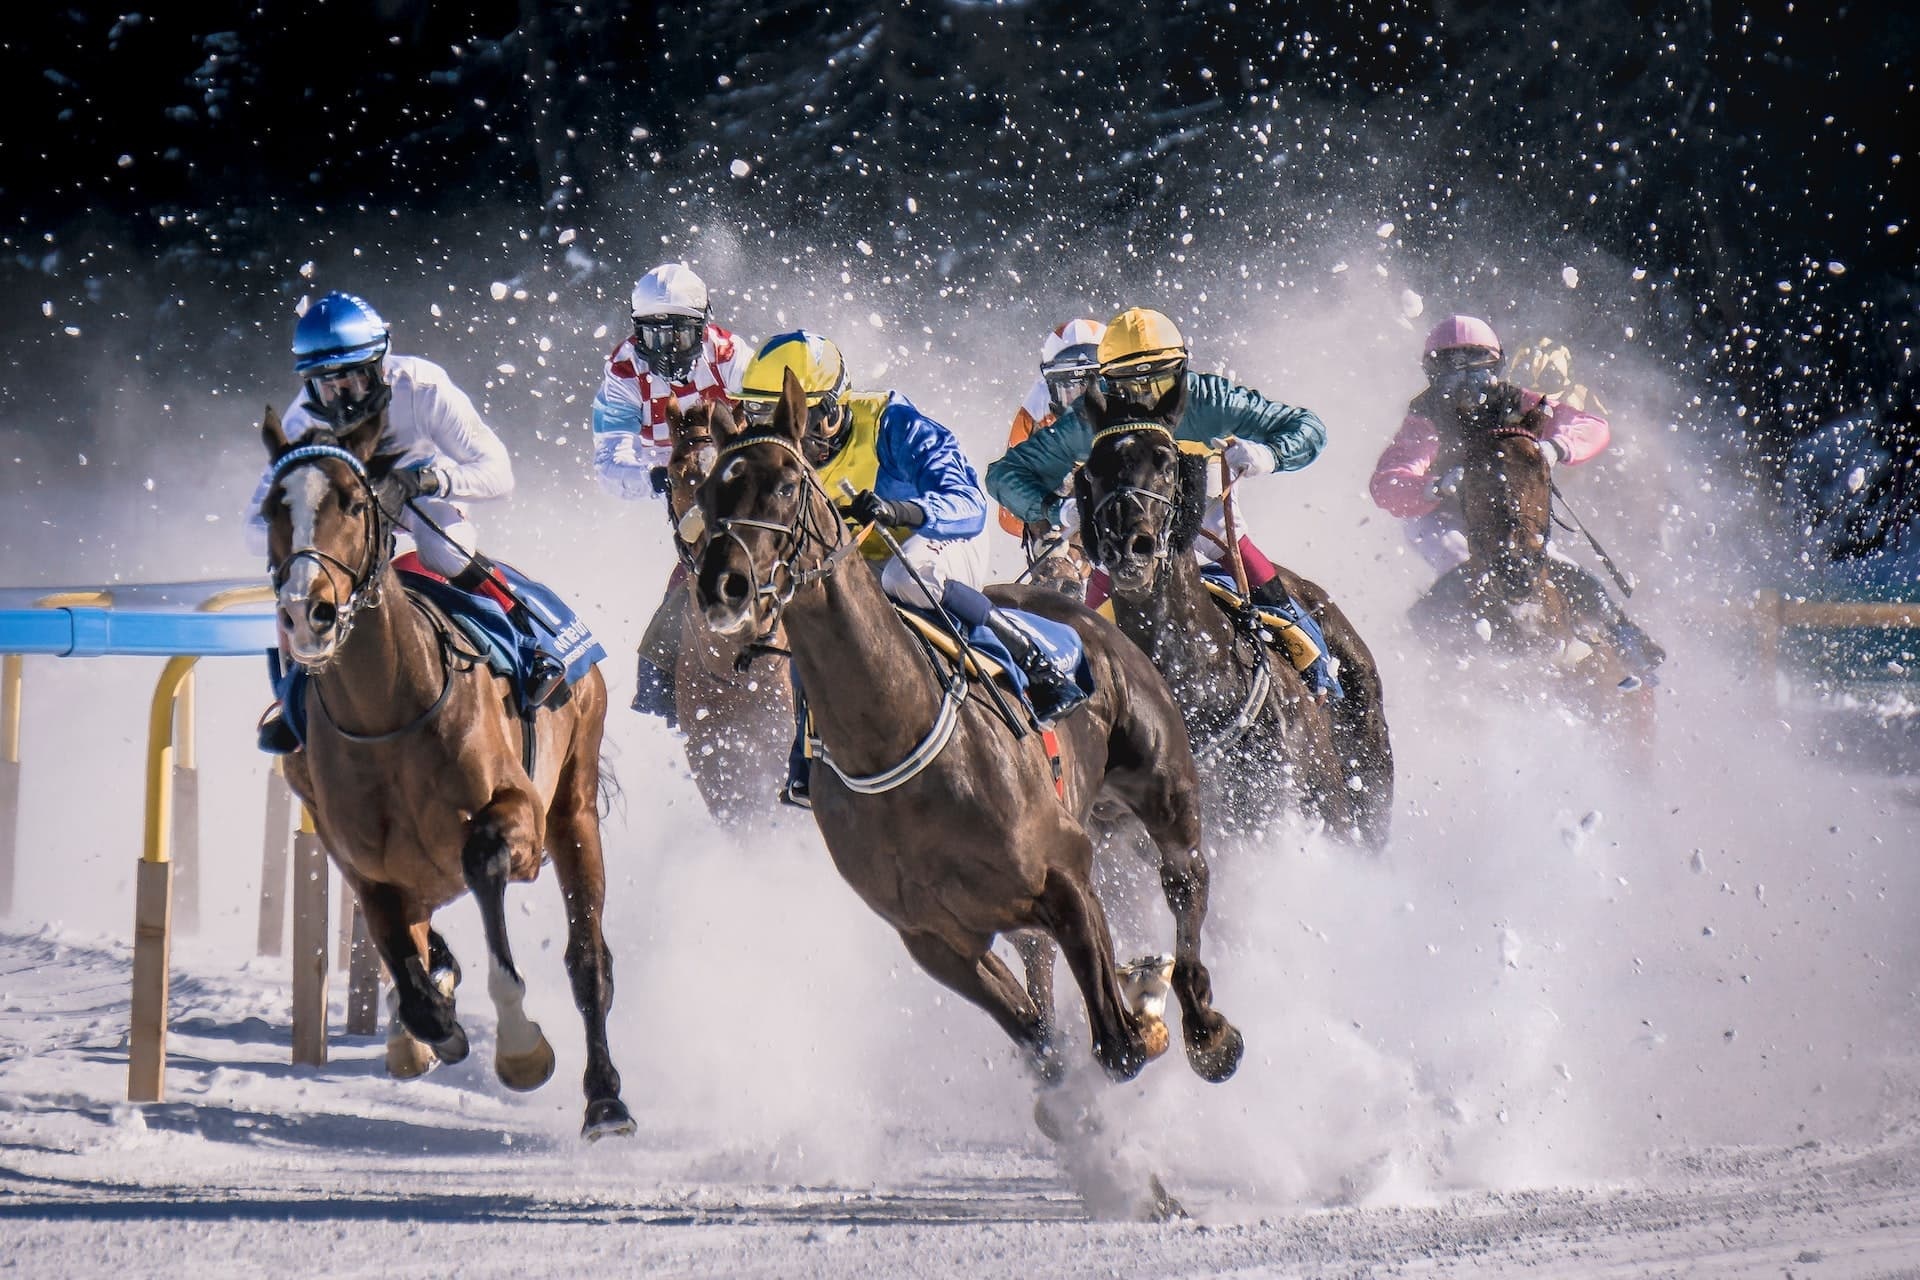 Equestrian Sports: Winter flat racing, The most popular horse riding activity around the world. 1920x1280 HD Wallpaper.